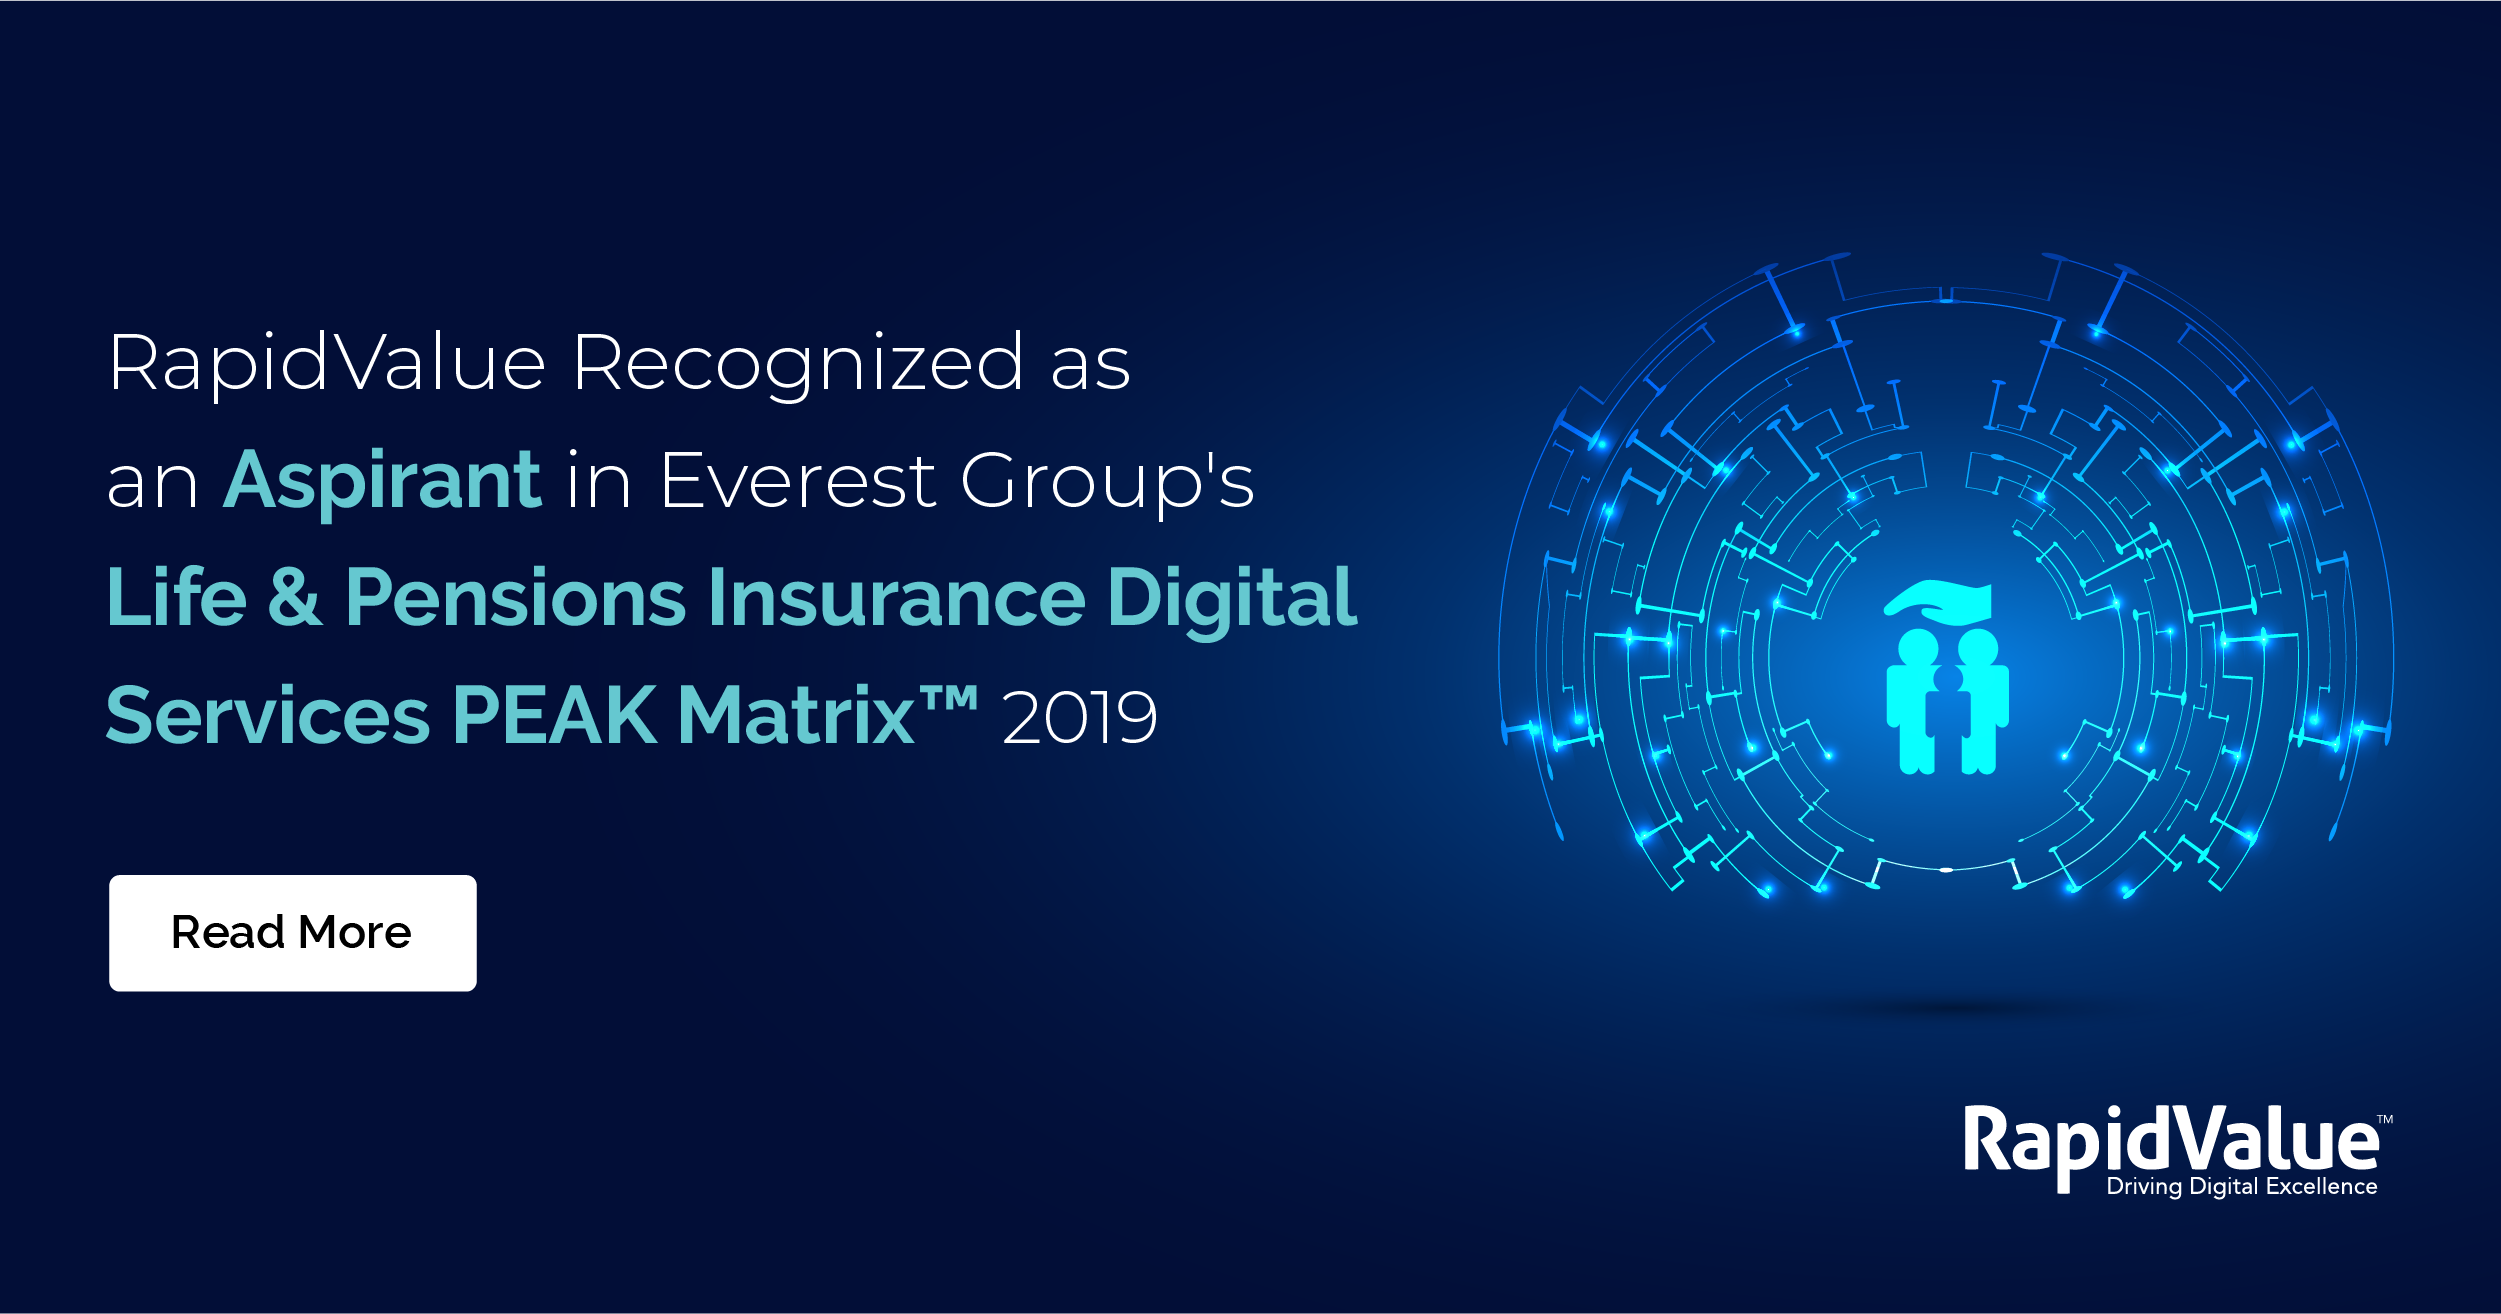 RapidValue Featured as an Aspirant in Everest Group&rsqu